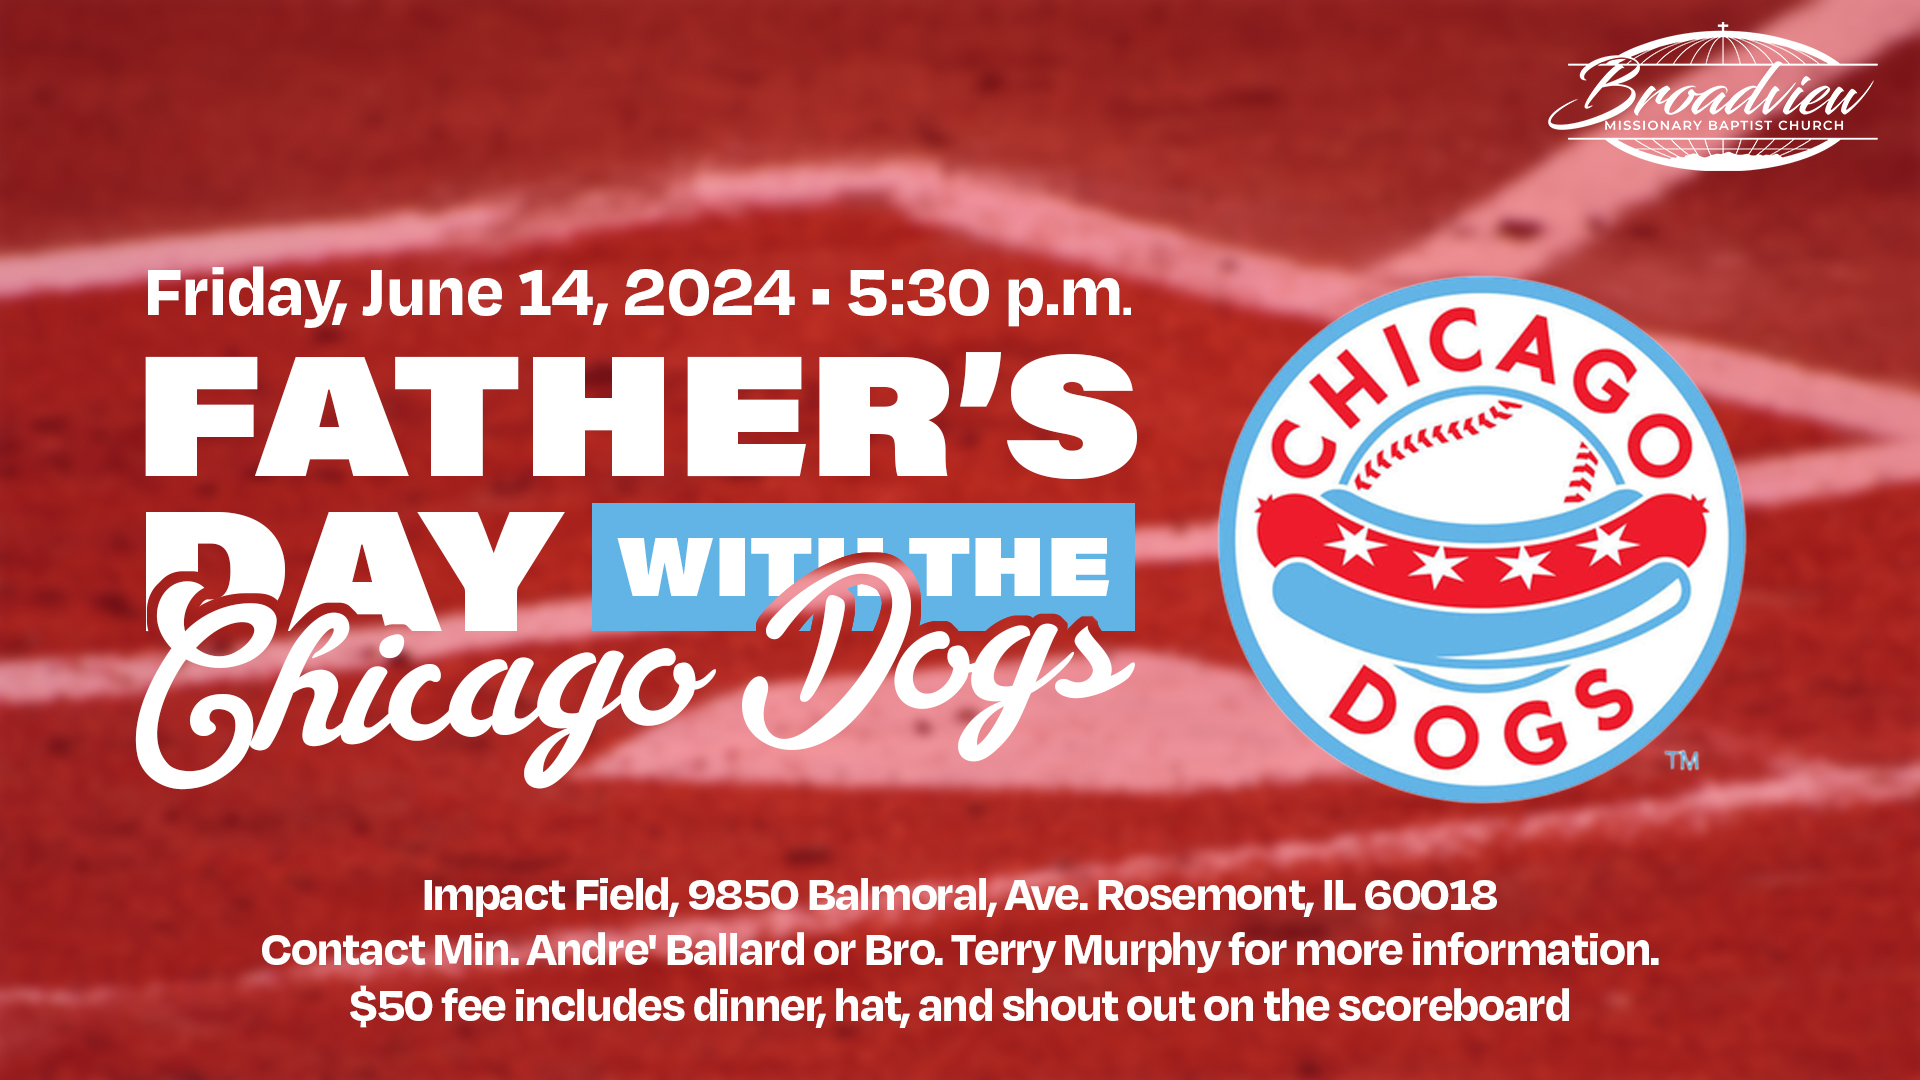 Father's Day with the Chicago Dogs - concpet - 2 1